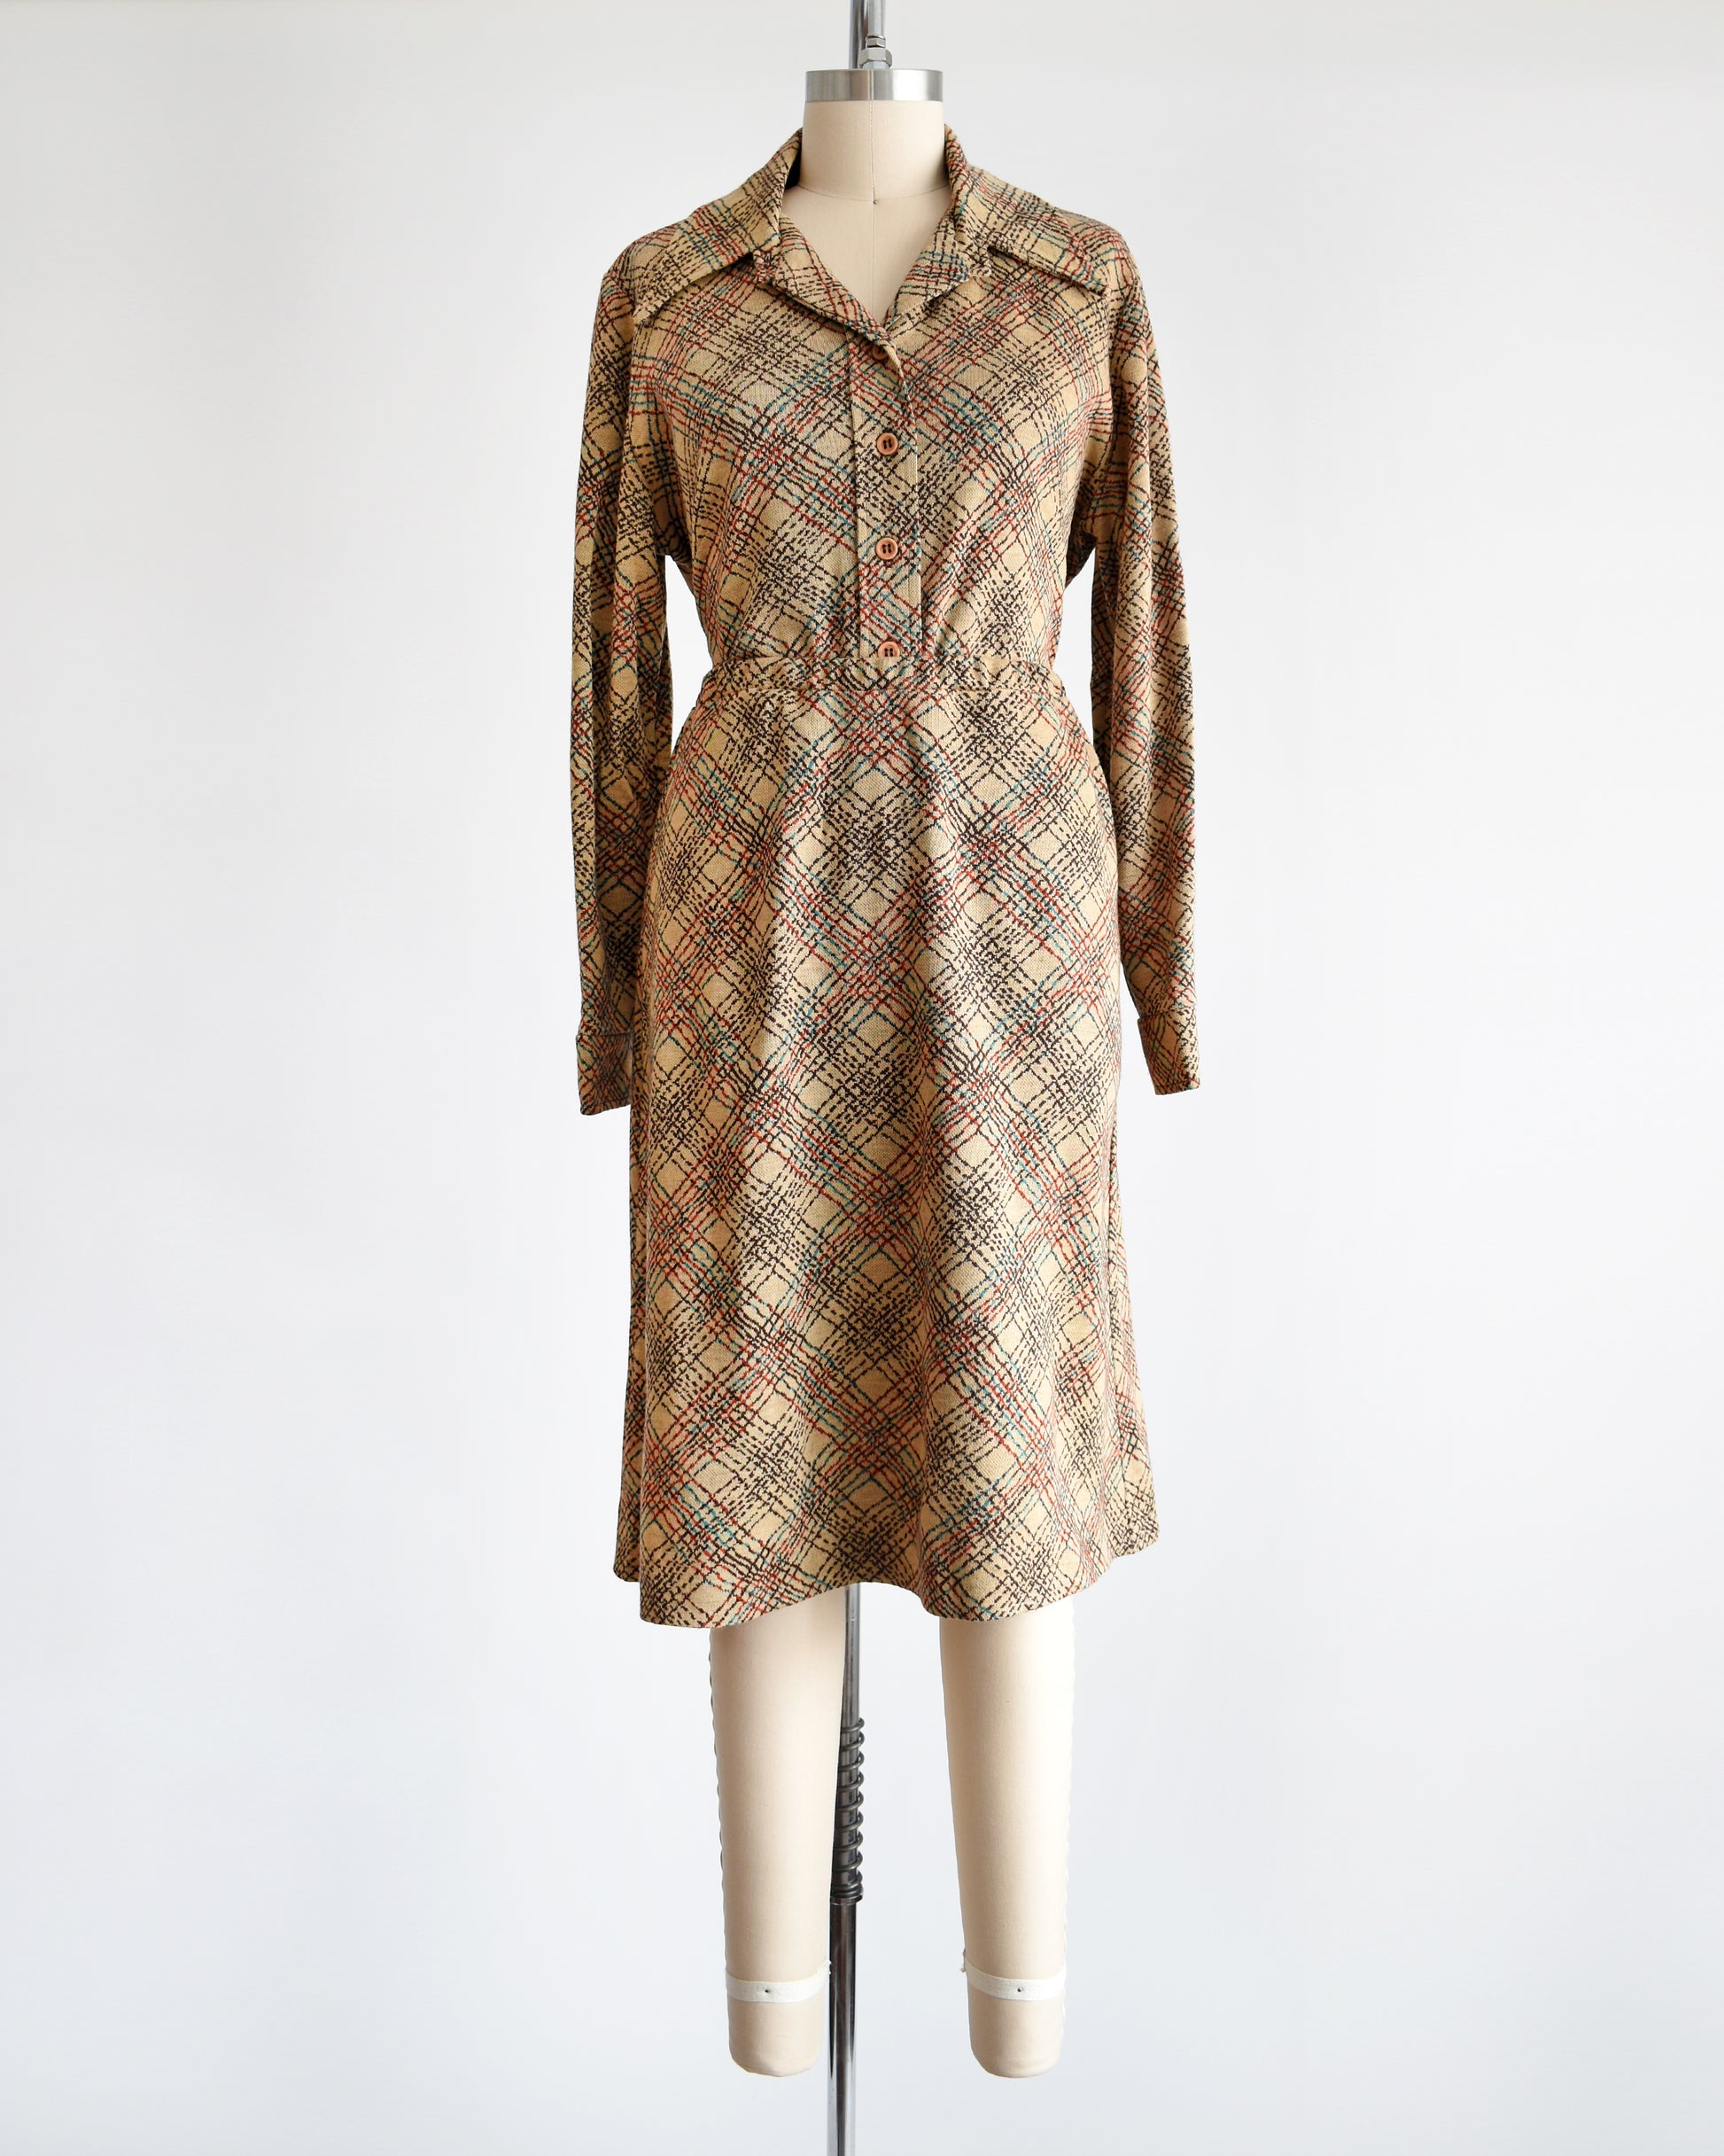 a vintage 1970s brown plaid blouse and skirt set